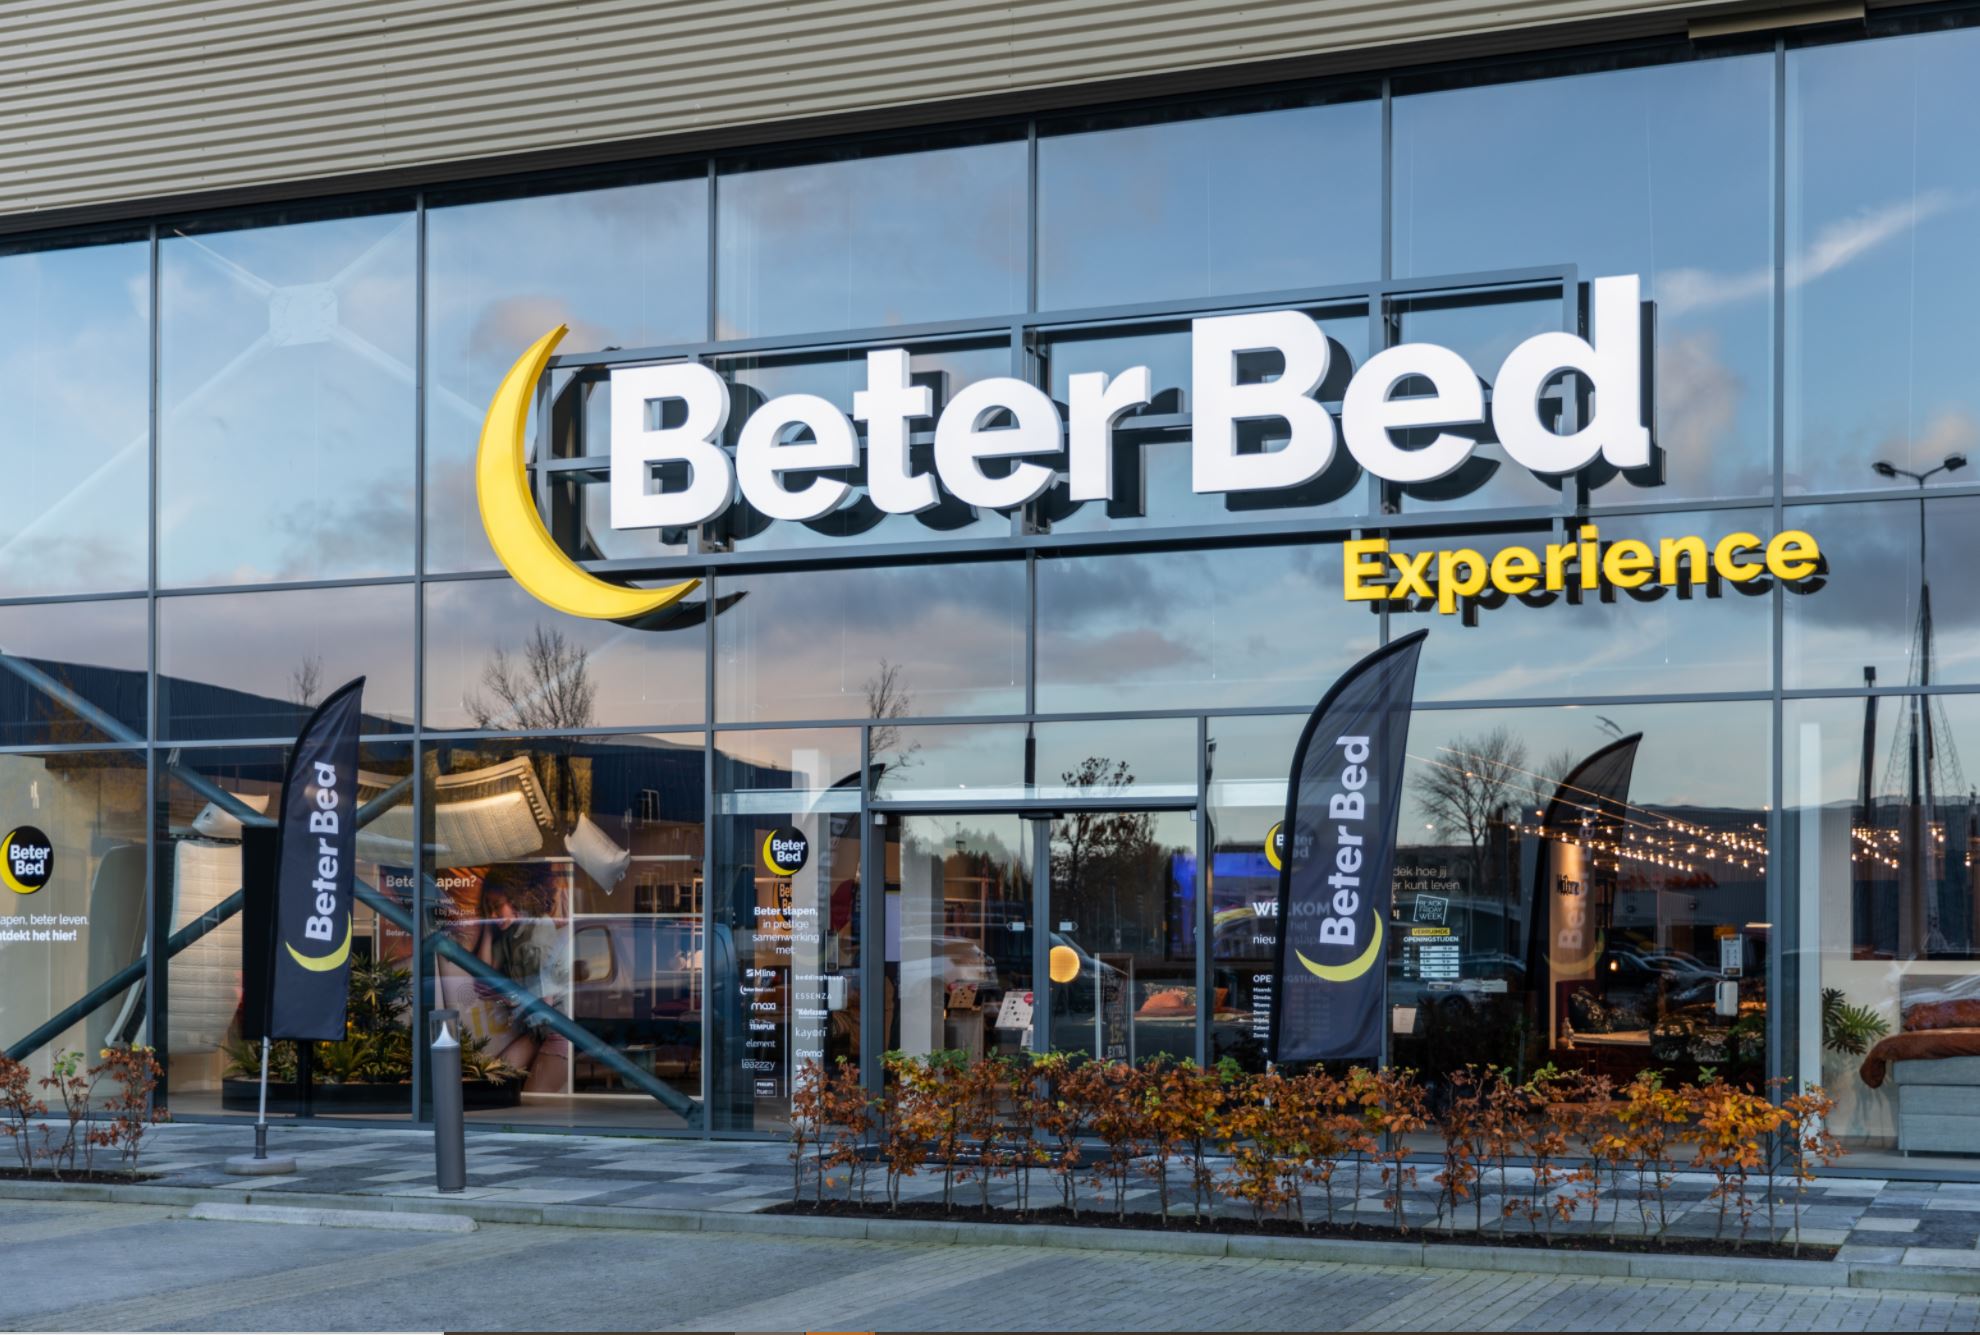 Beter Bed opens first Slaap Experience